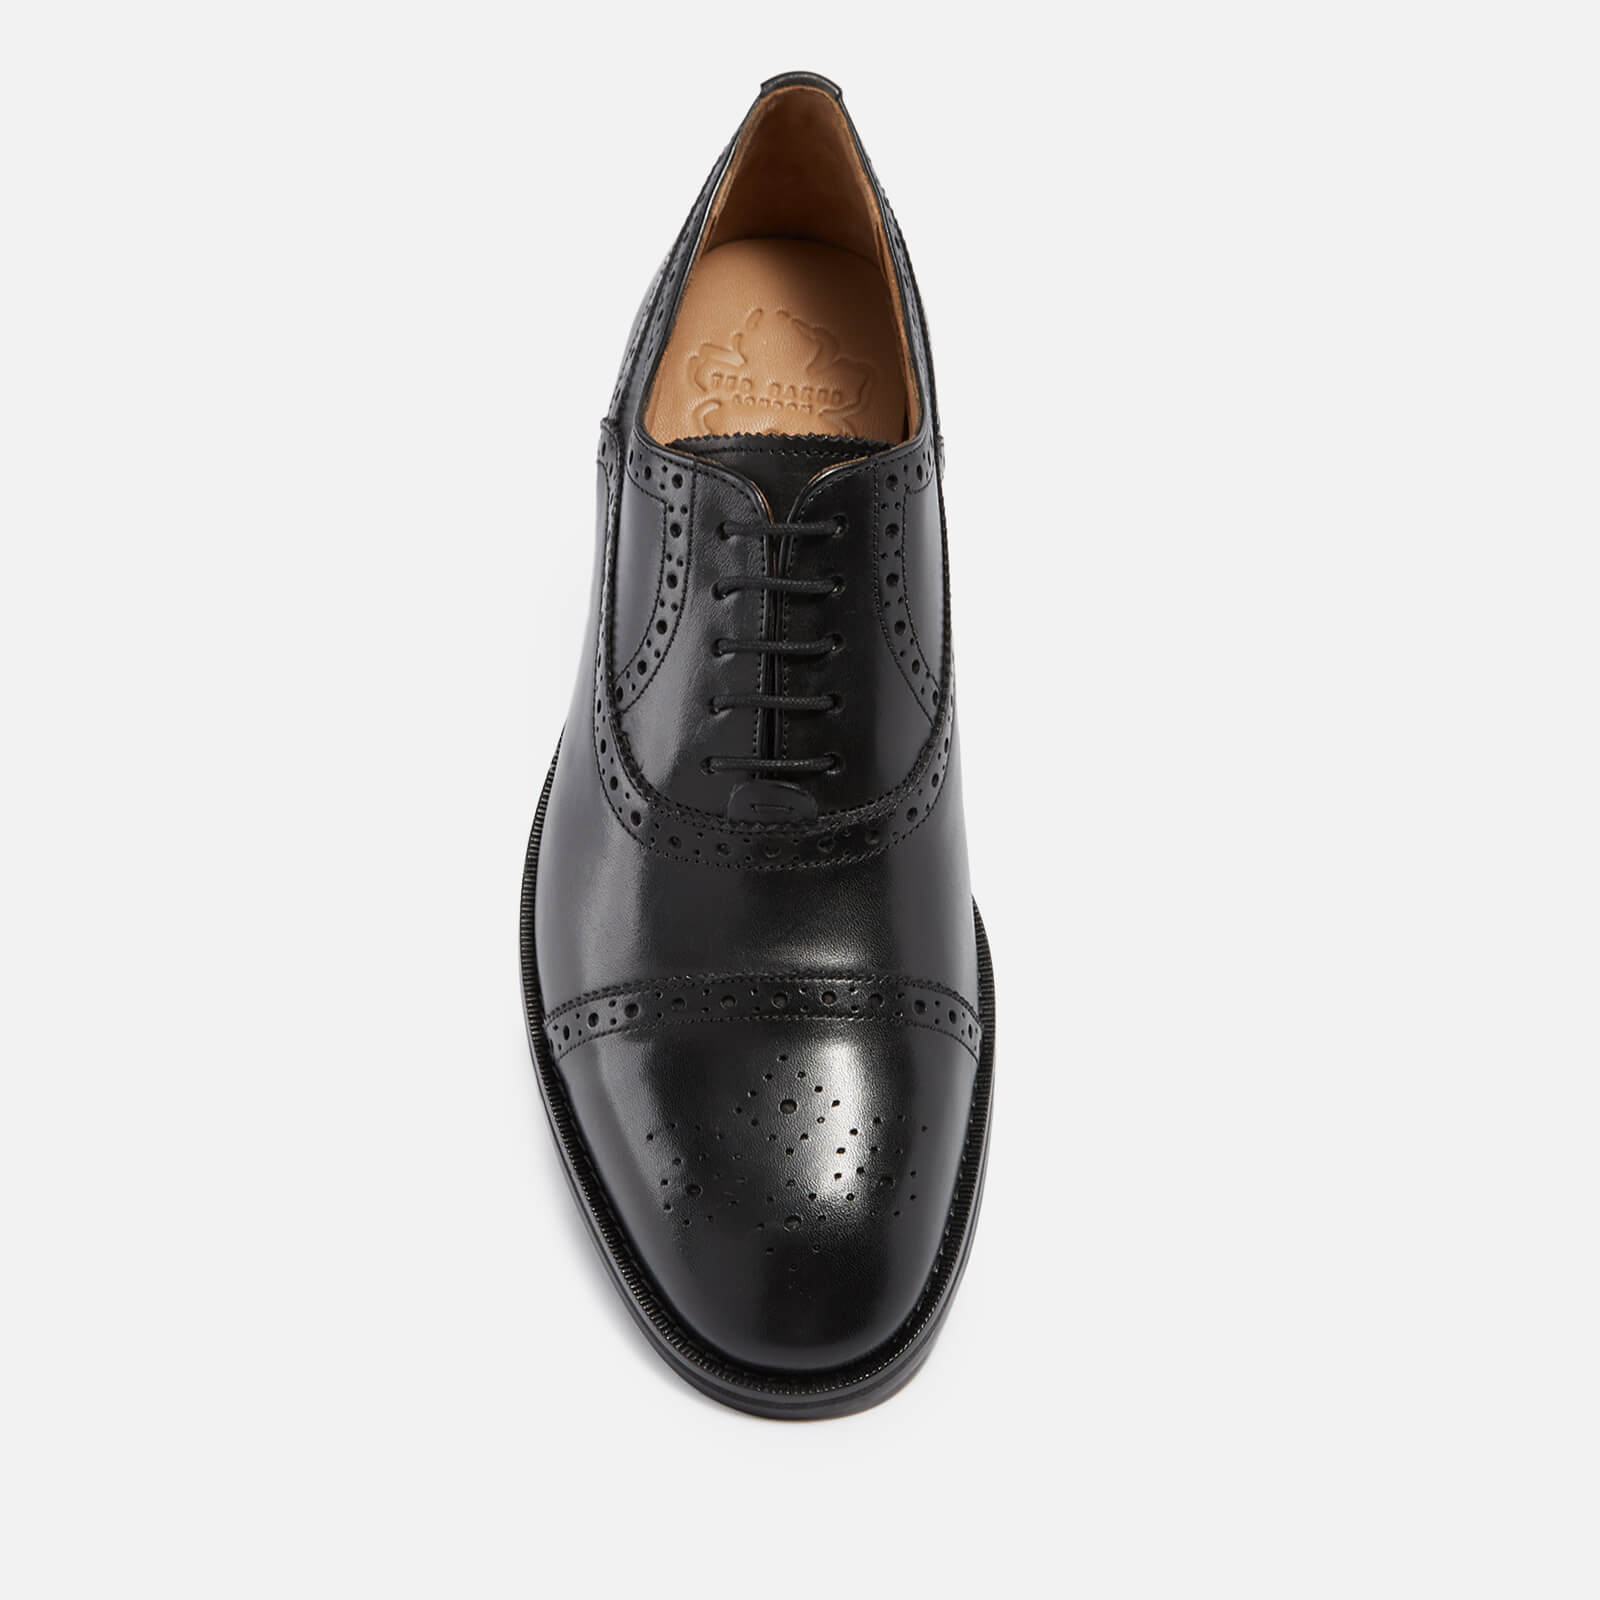 ted baker arniie leather toe cap oxford shoes - uk 7